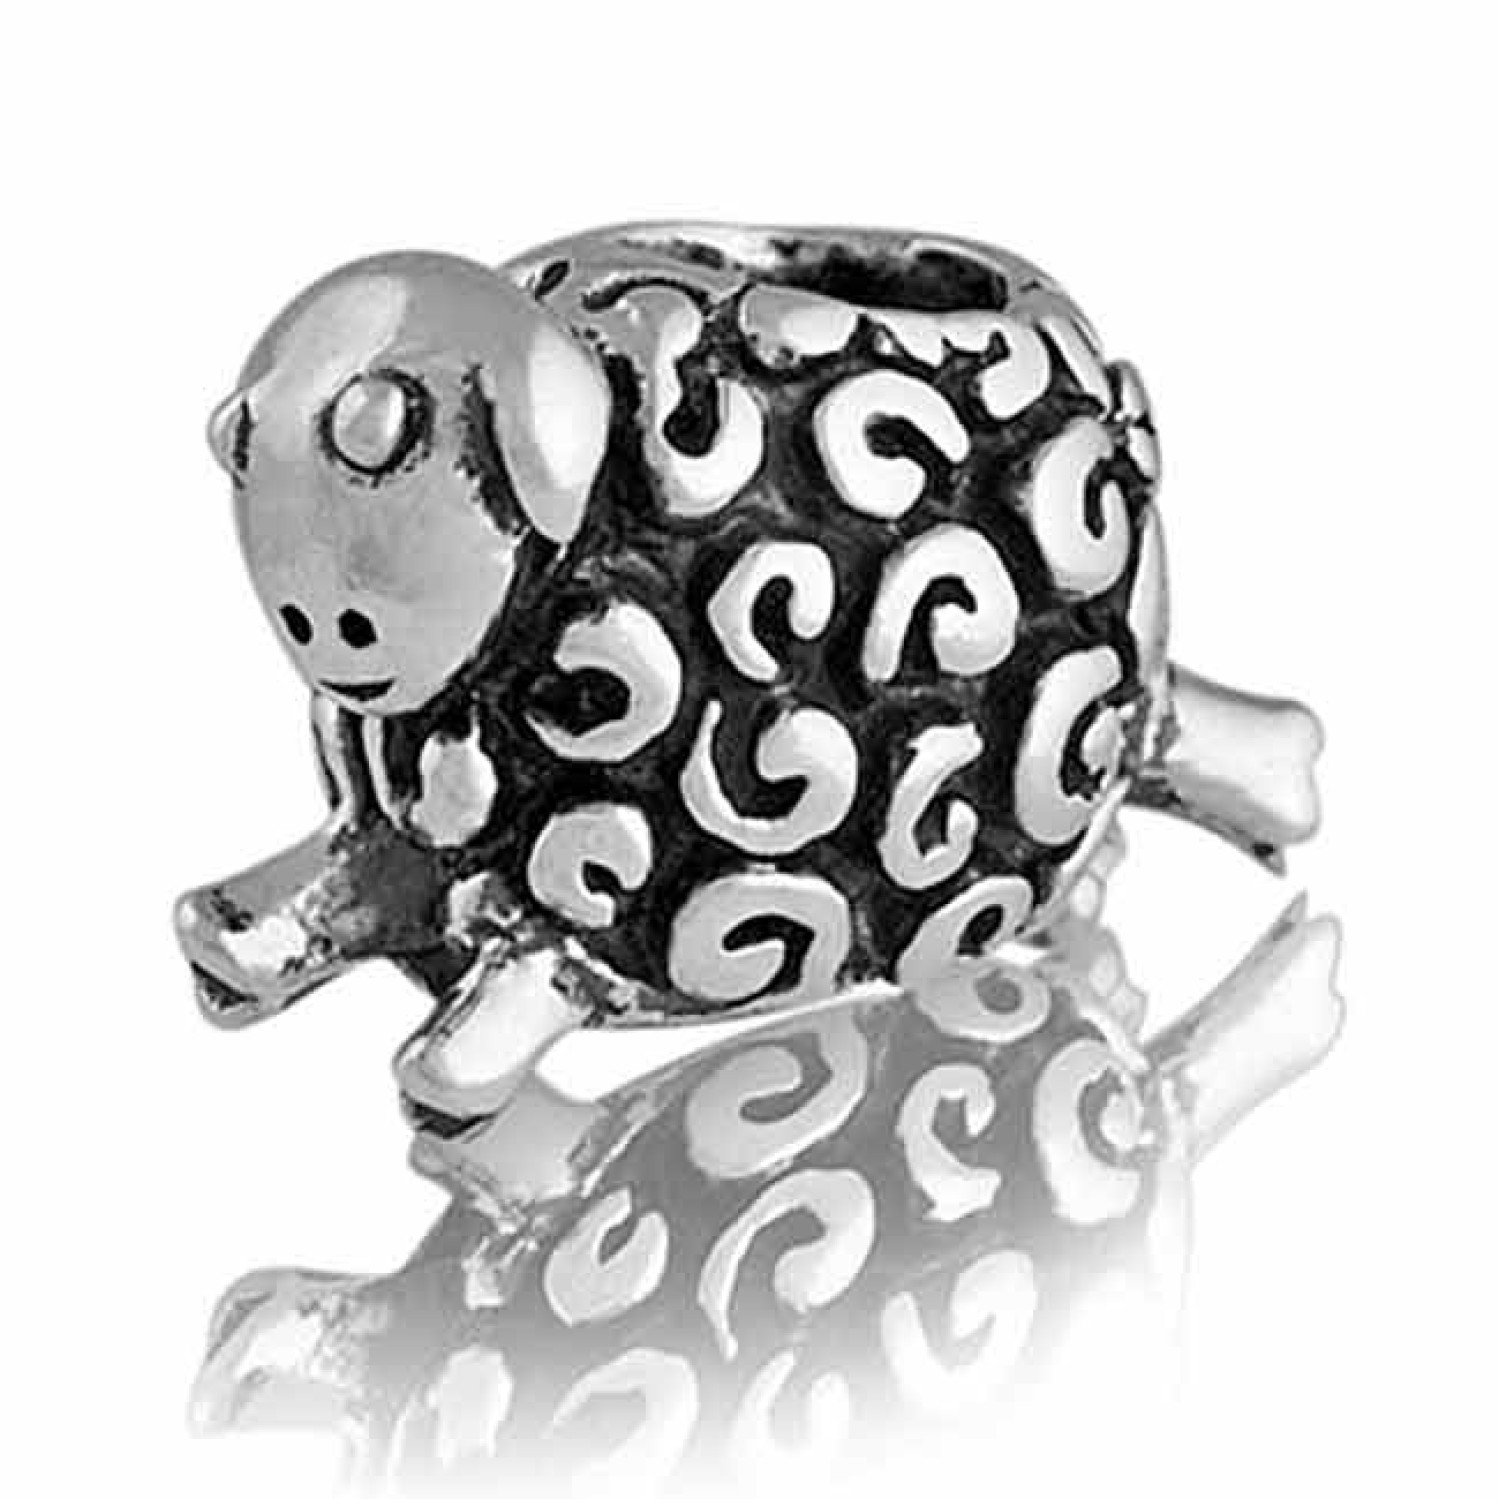 LK027 Evolve  NZ Woolly Sheep. LK027 Evolve Silver Charm NZ Woolly Sheep Renowned as a country where there are more sheep than people, New Zealand is known all over the world for its sheep farming. Visitors travelling the length of Aotearoa will find @chr